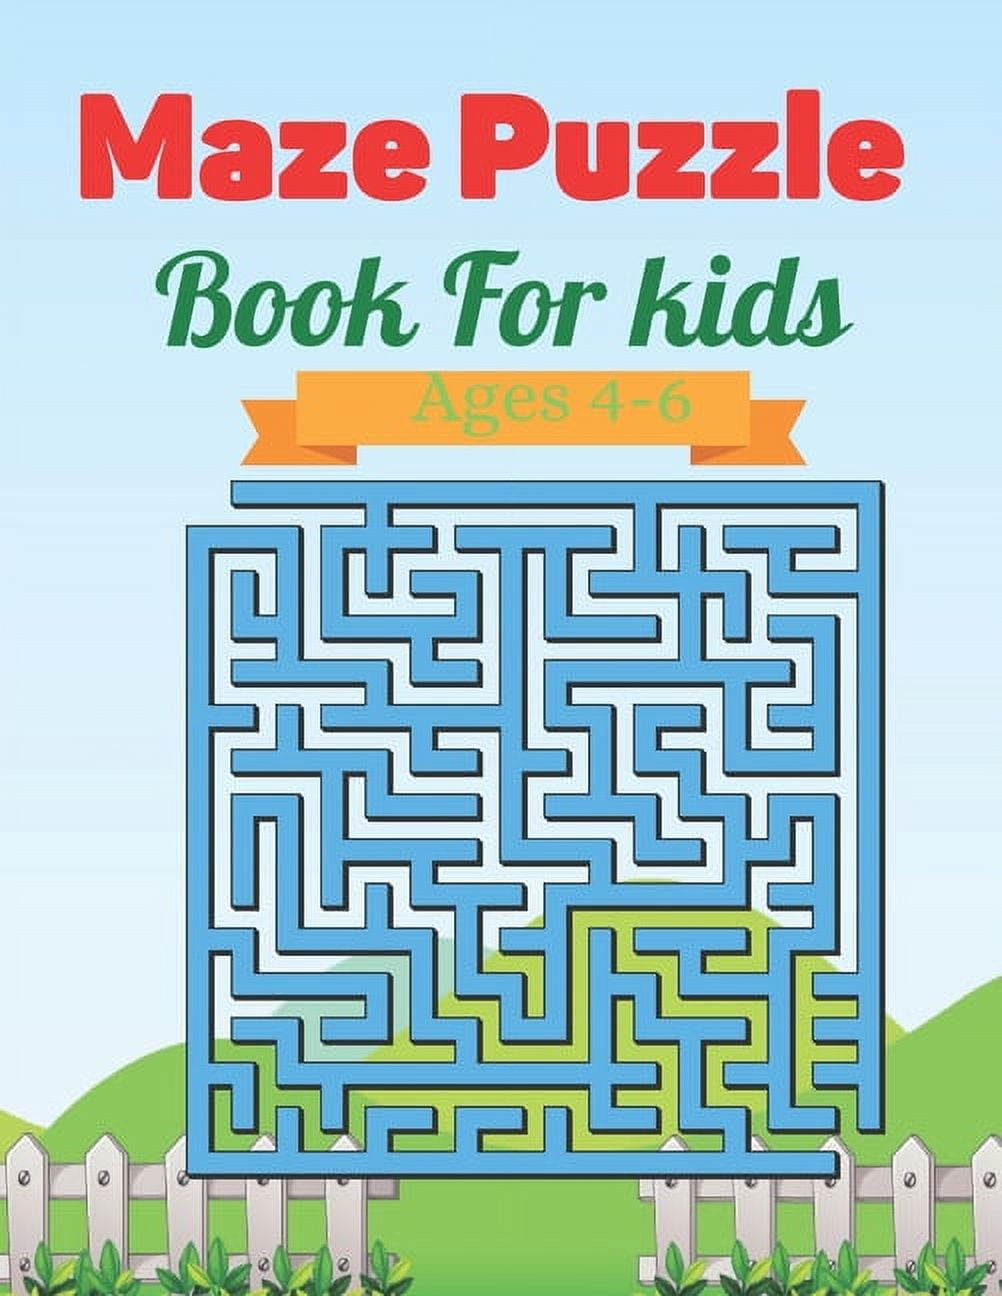 Maze Puzzle Book For kids Ages 4-6 : Fun and Amazing Maze Book for Kids  (Mazes for Kids Ages 4-6) (Paperback)